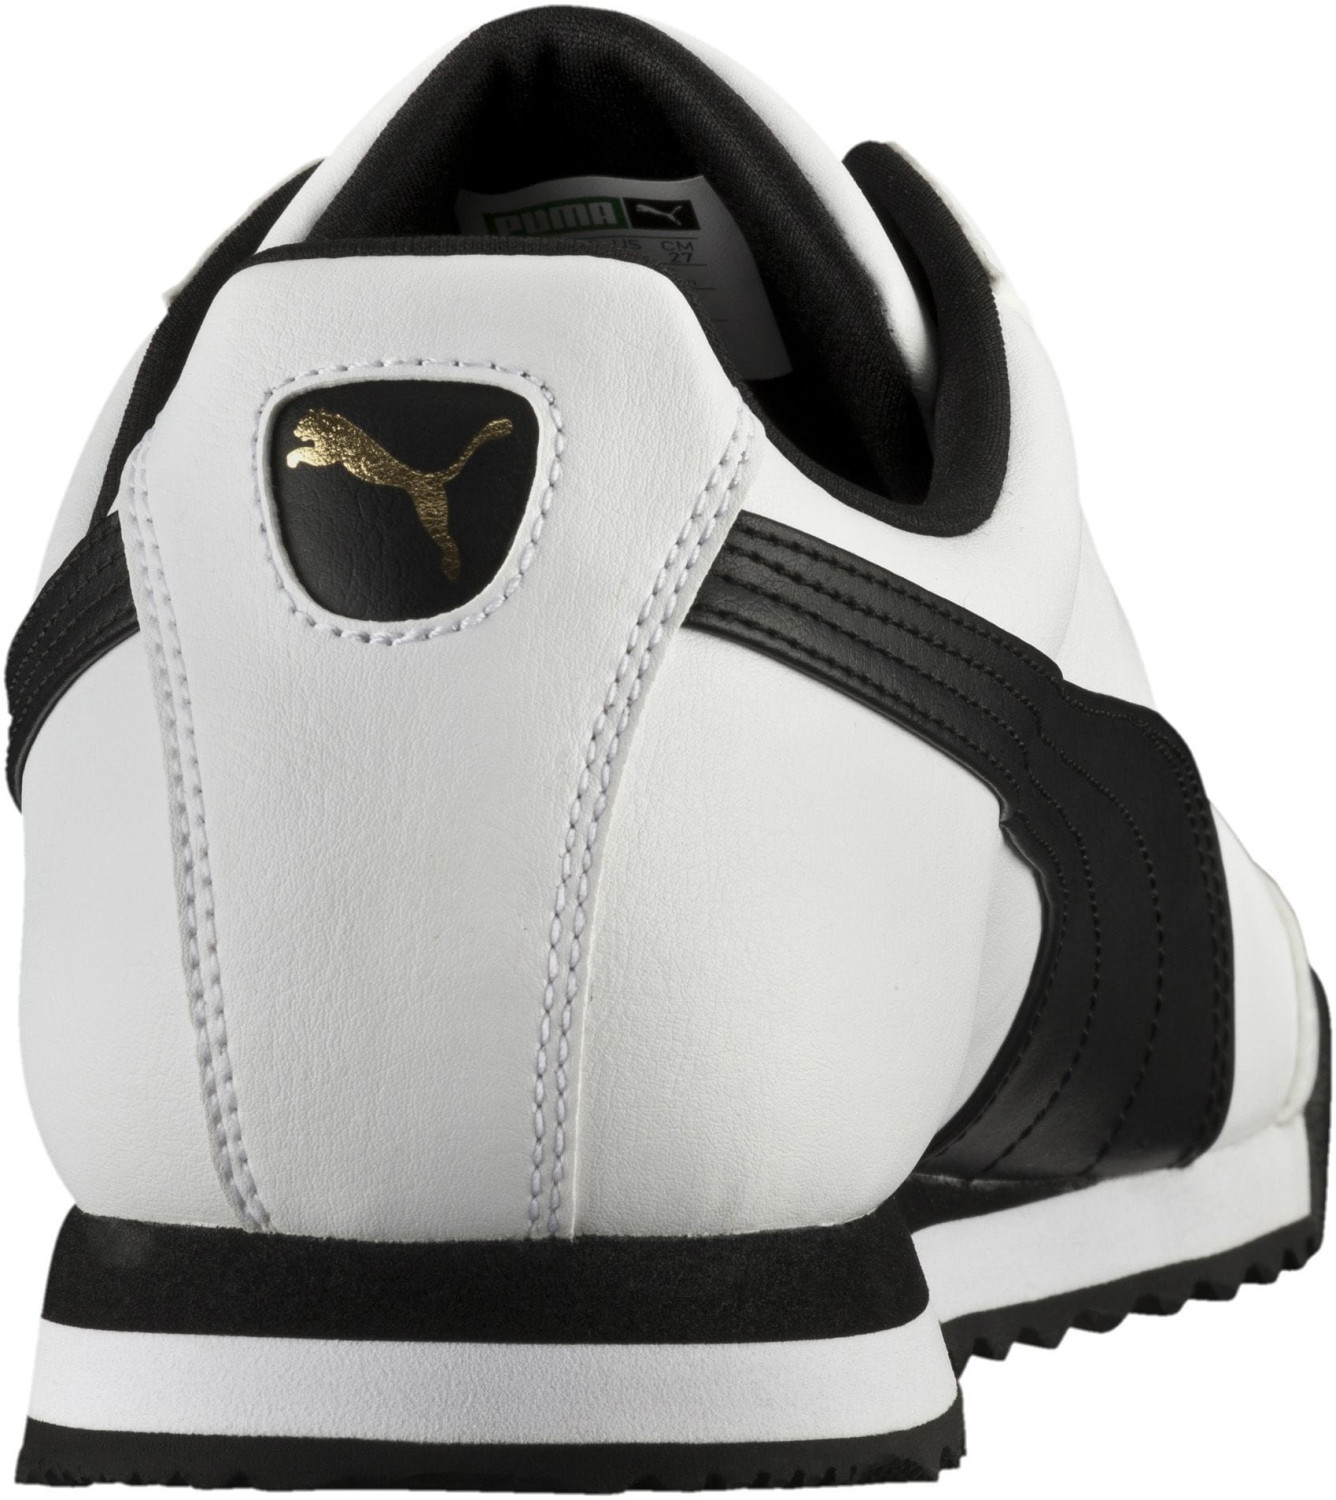 Buy Puma Roma Basic white/black from £65.00 (Today) – Best Deals on ...